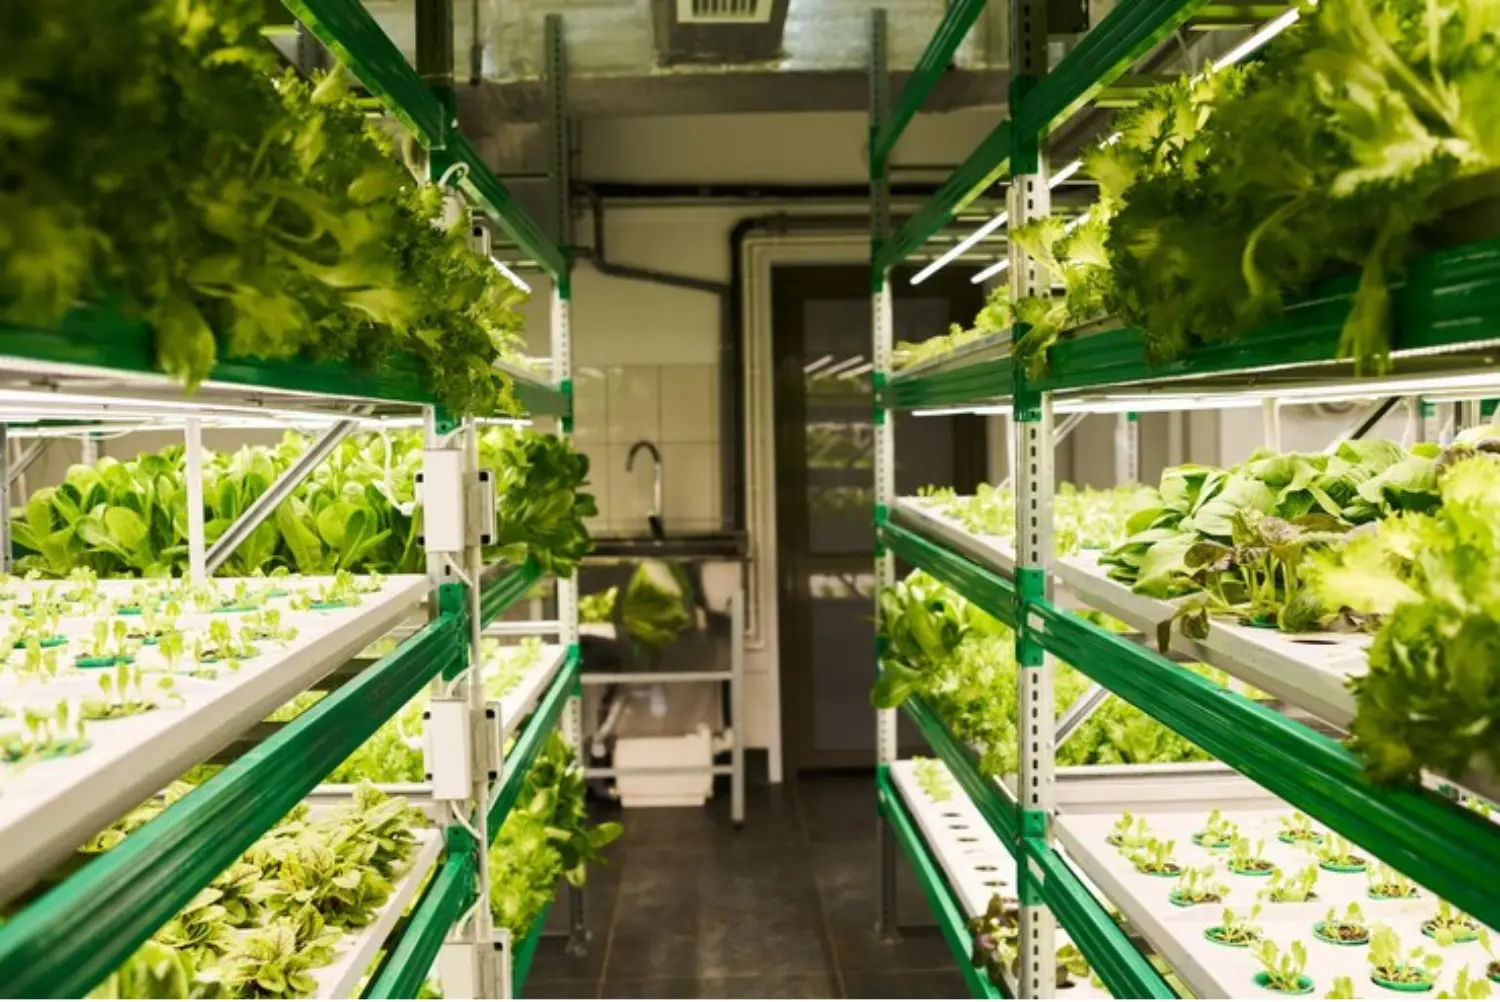 Vertical Hydroponic Container Farming